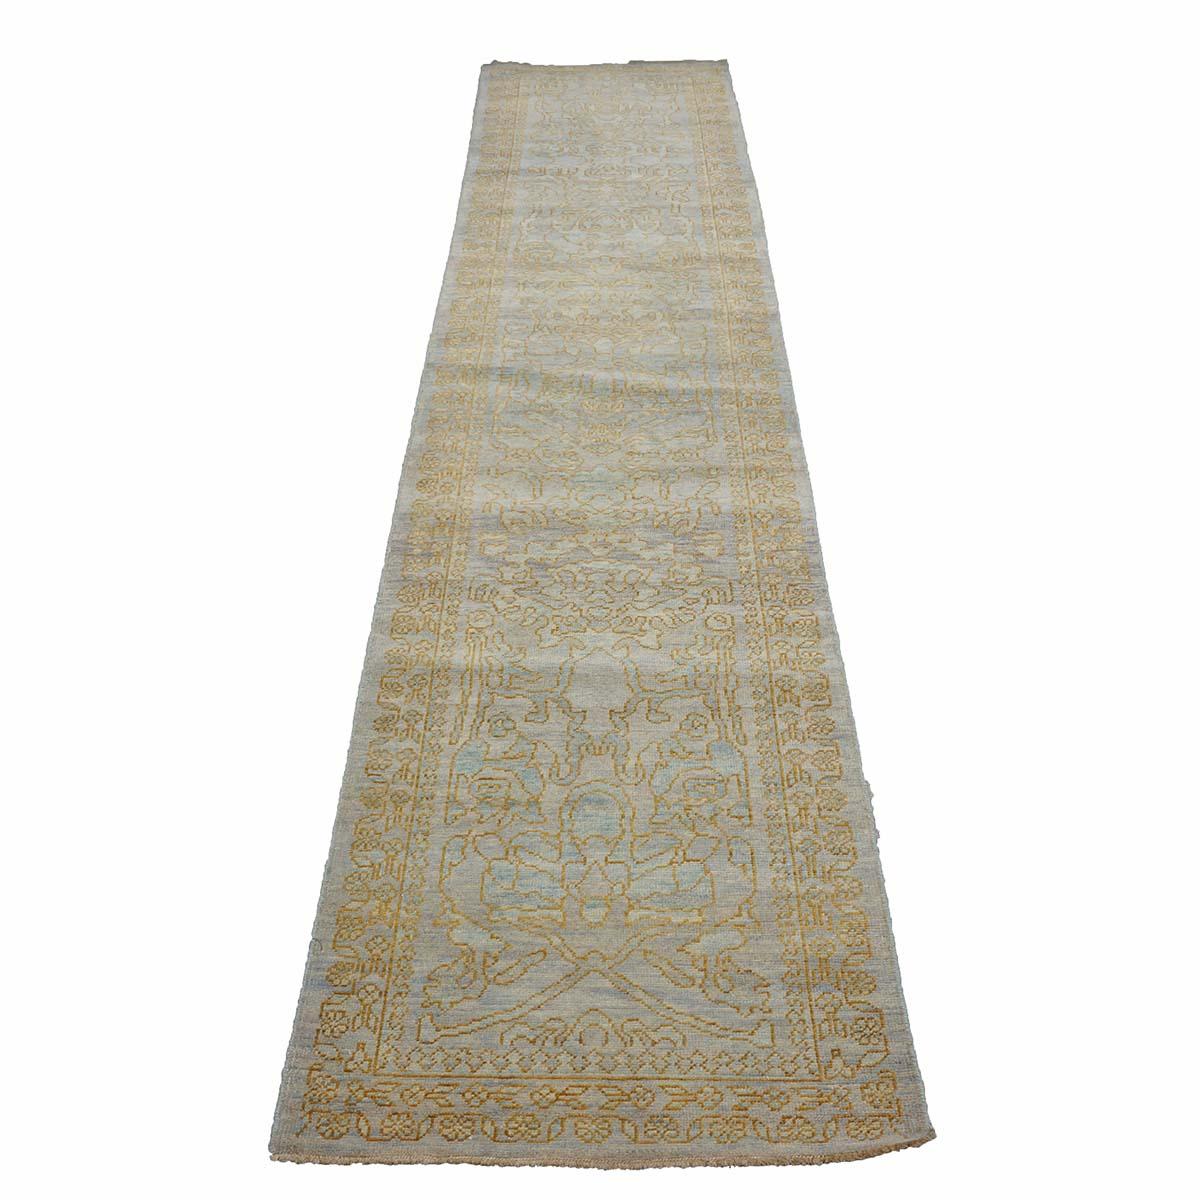 21st Century Sultanabad Master 3x12 Light Slate & Gold Hallway Runner Rug In Excellent Condition For Sale In Houston, TX